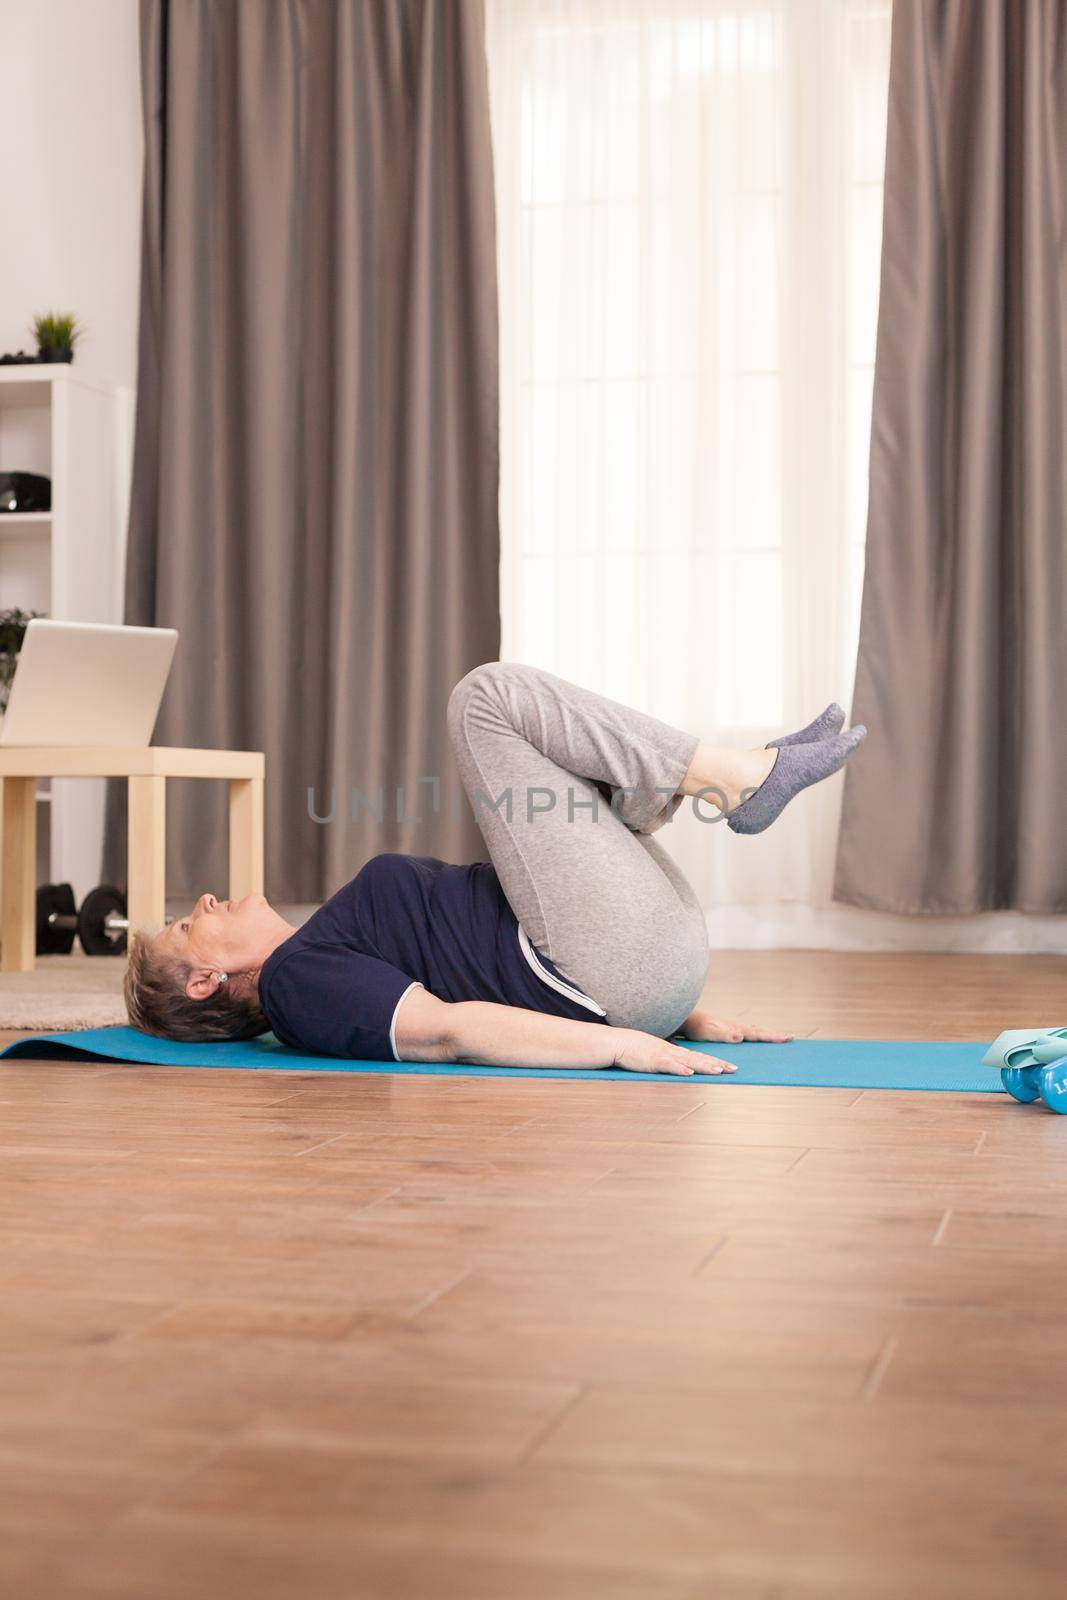 Abs physical training in living room by DCStudio